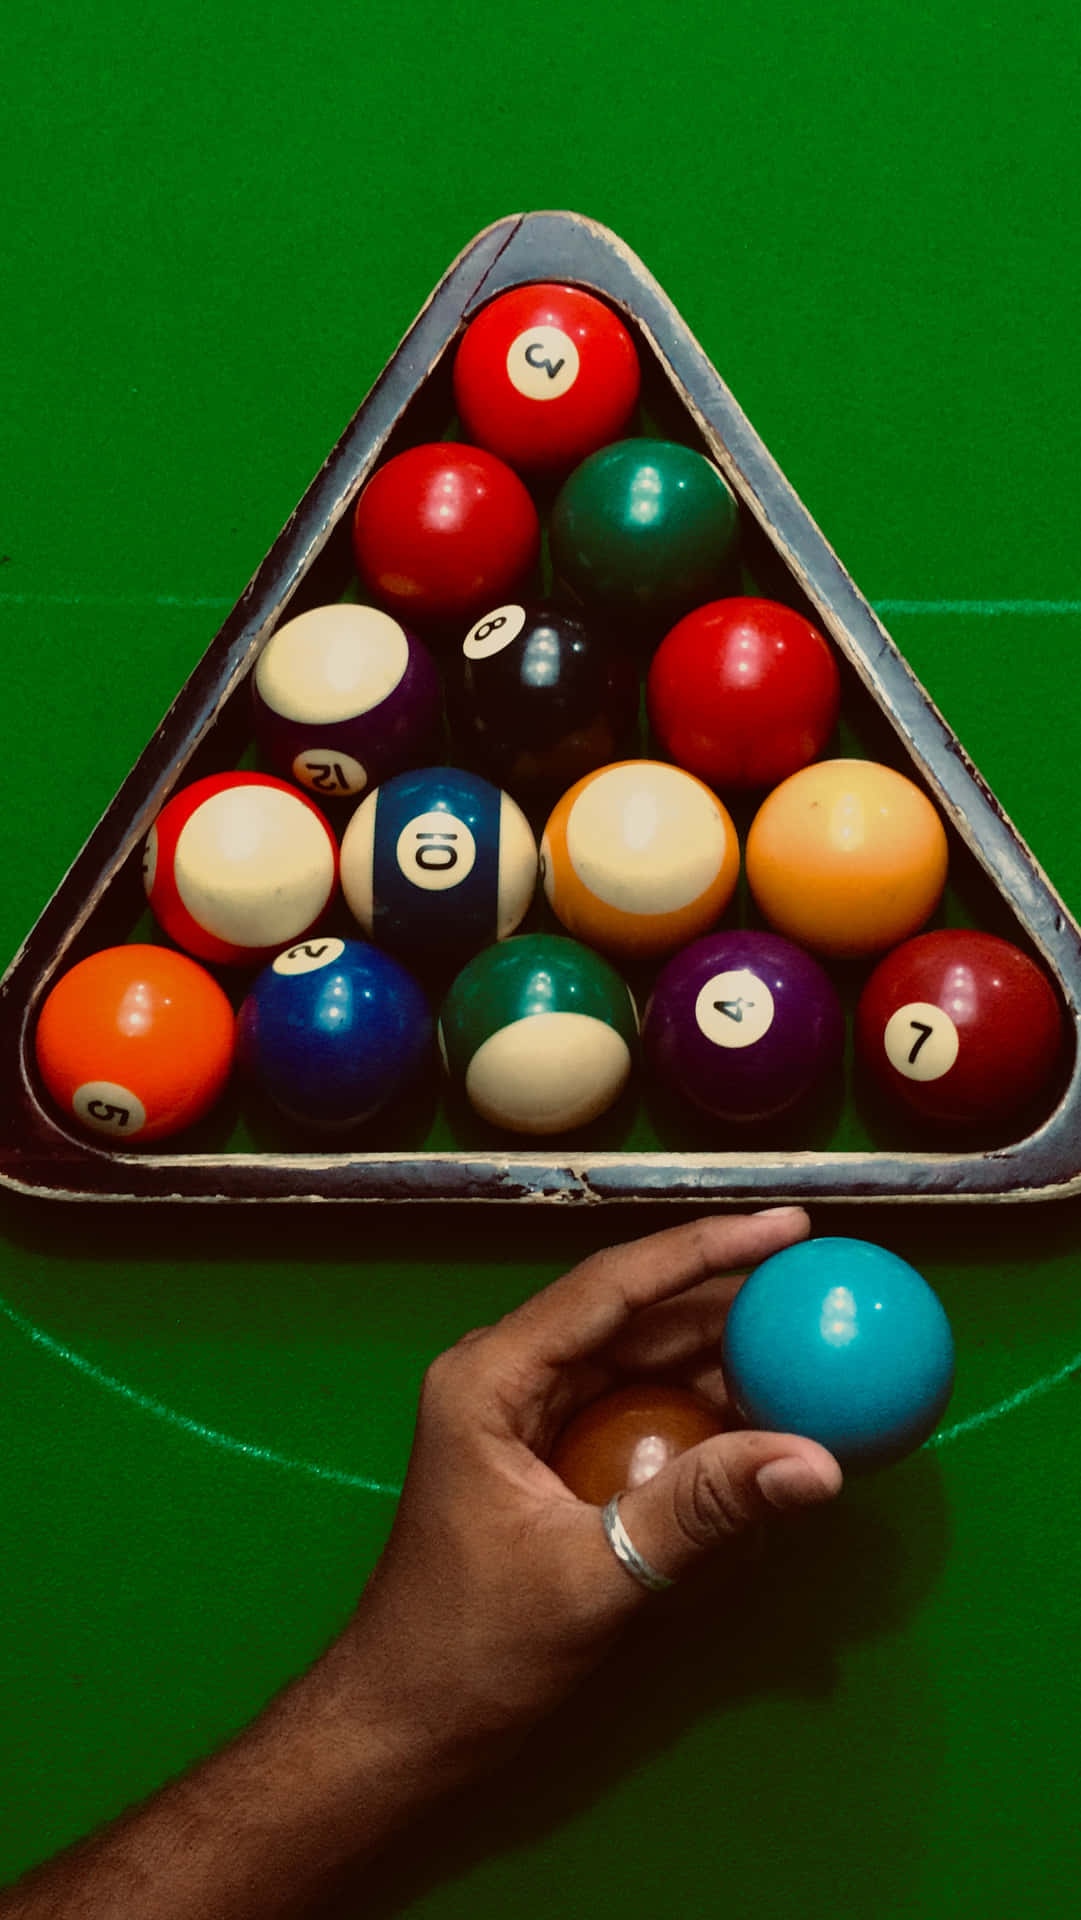 Mastering the Game of Billiards Wallpaper